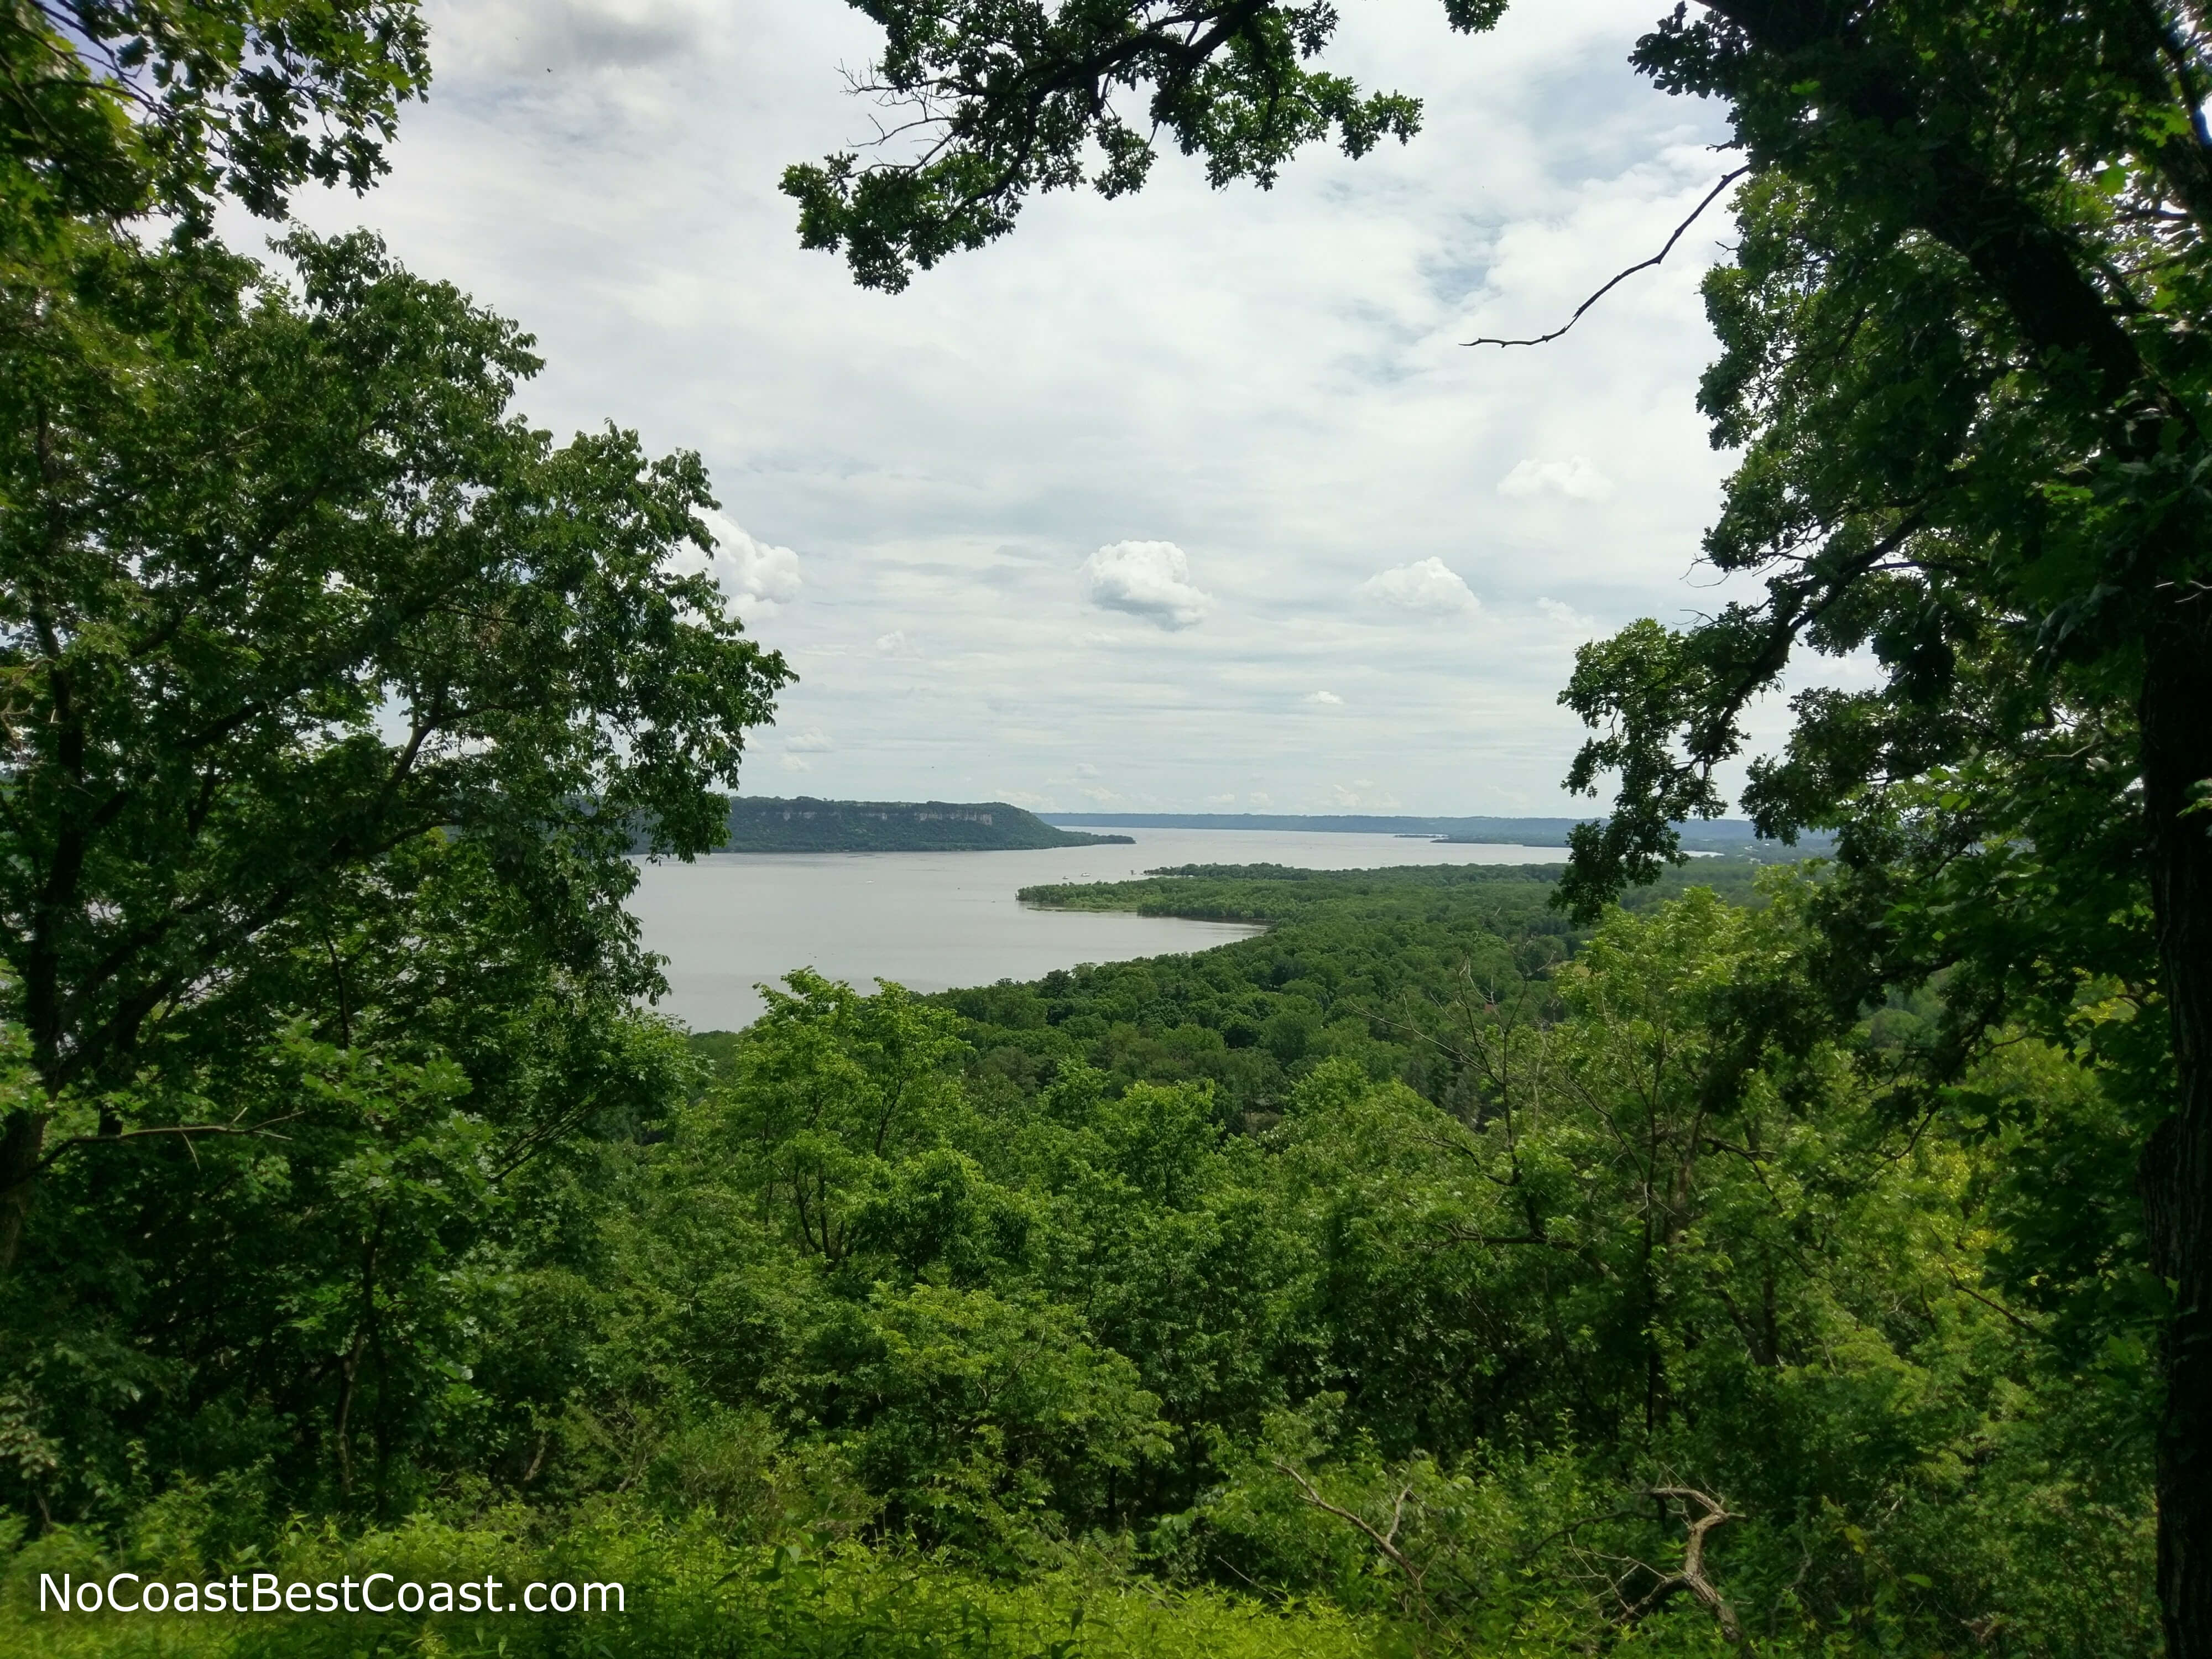 Overlooking the bluffs of the Mississippi River